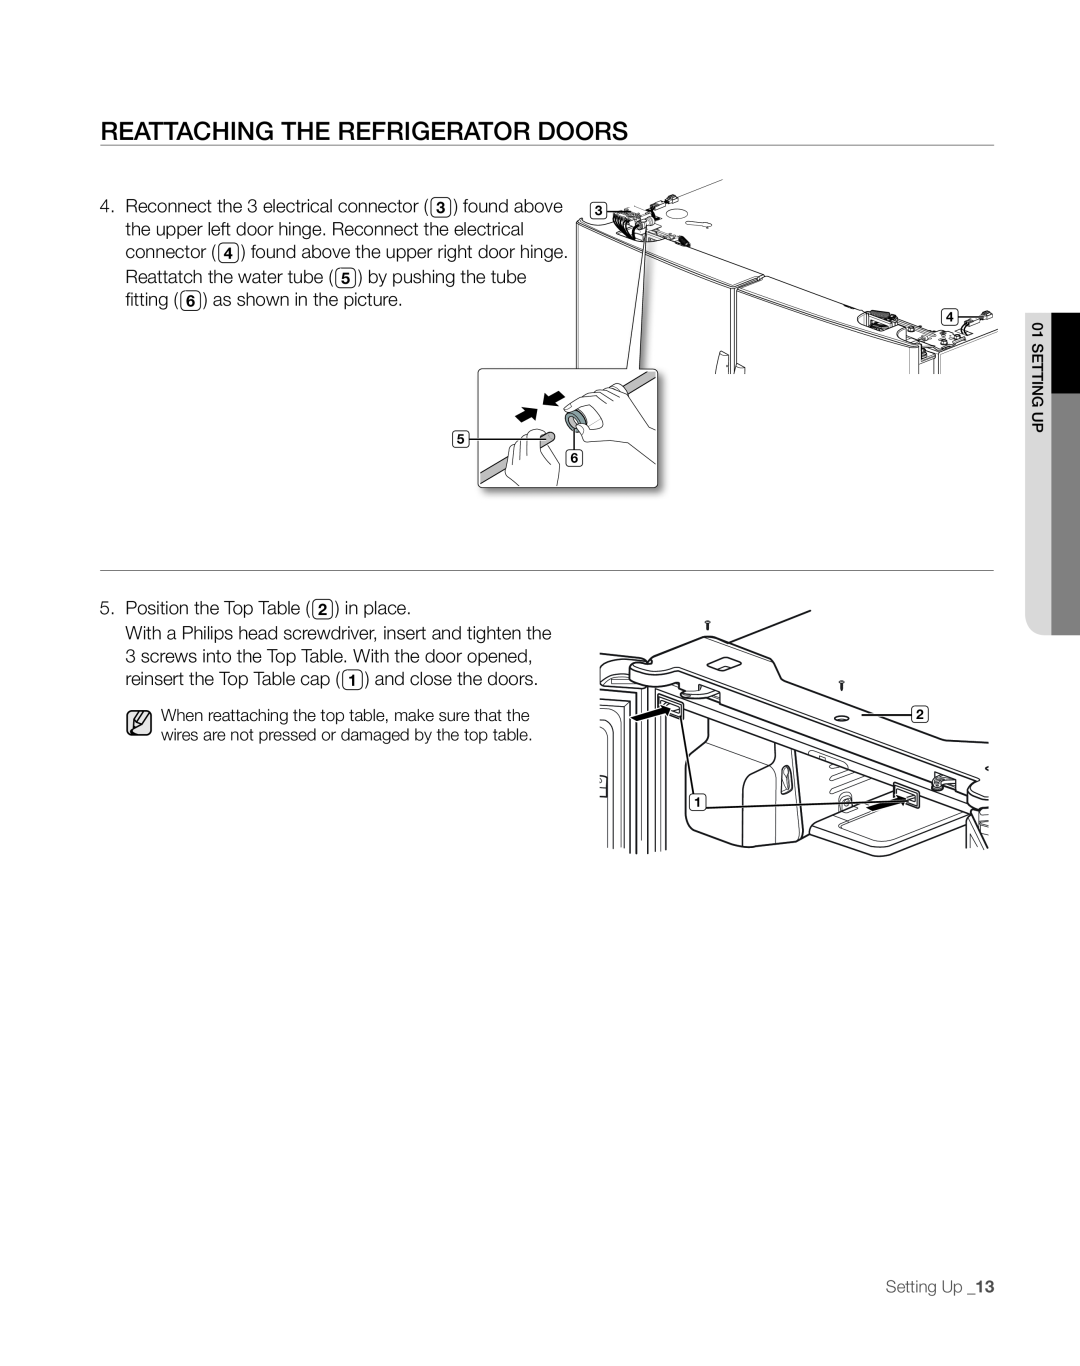 Sears RFG297AA manual REAttACHinG tHE REFRiGERAtoR DooRs, Position the Top in place 